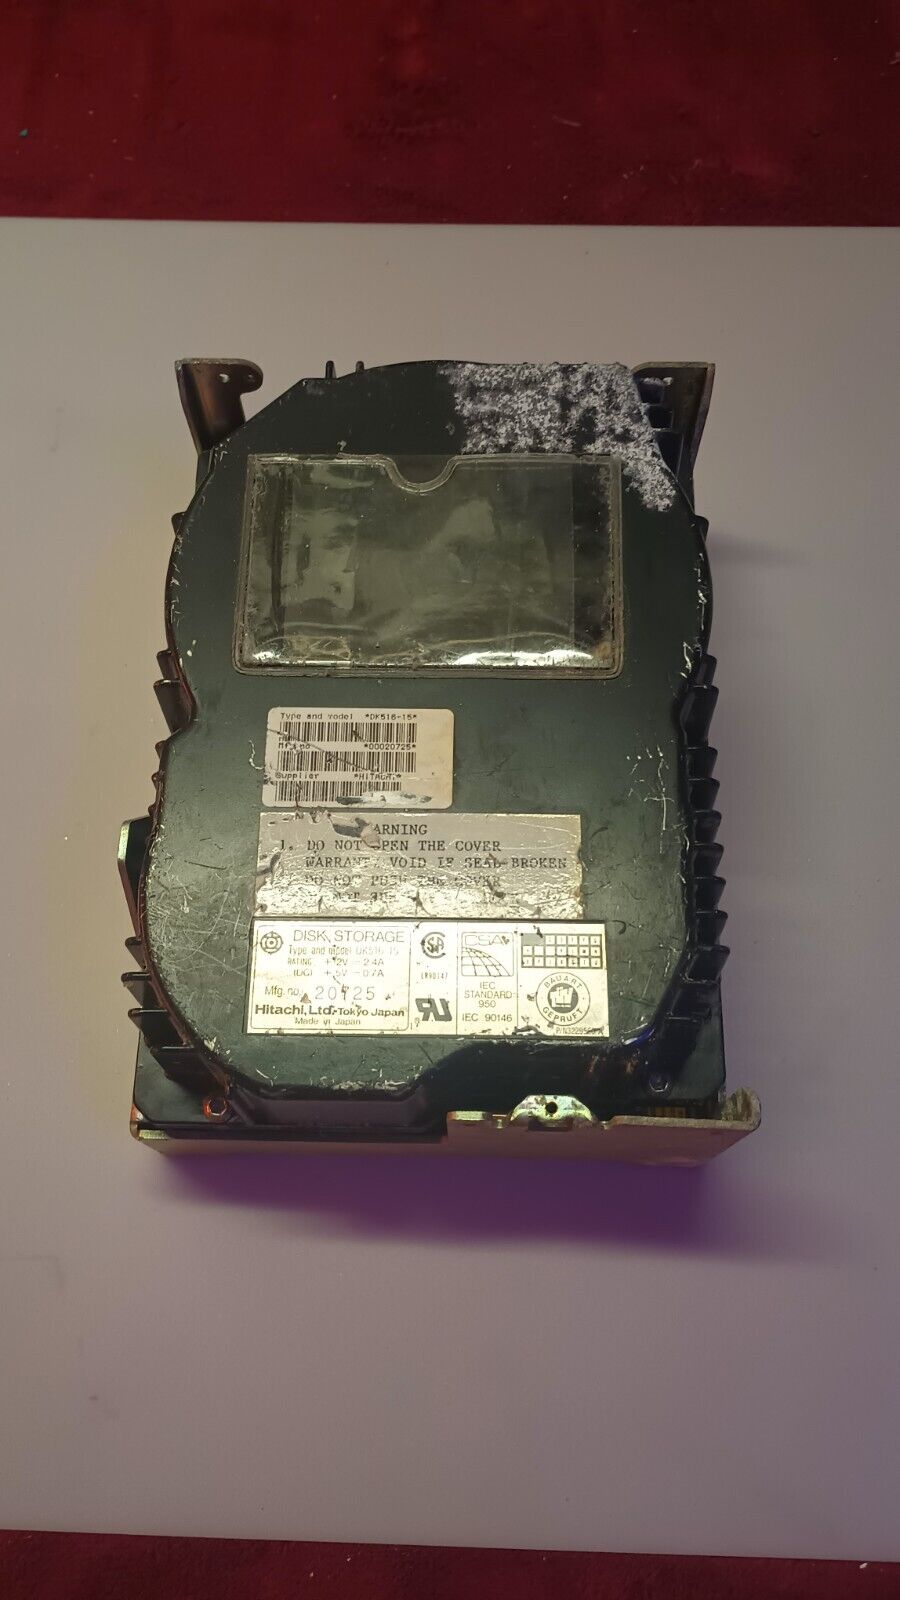 One Vintage Hard Drive For Collection Or Recovery Purposes